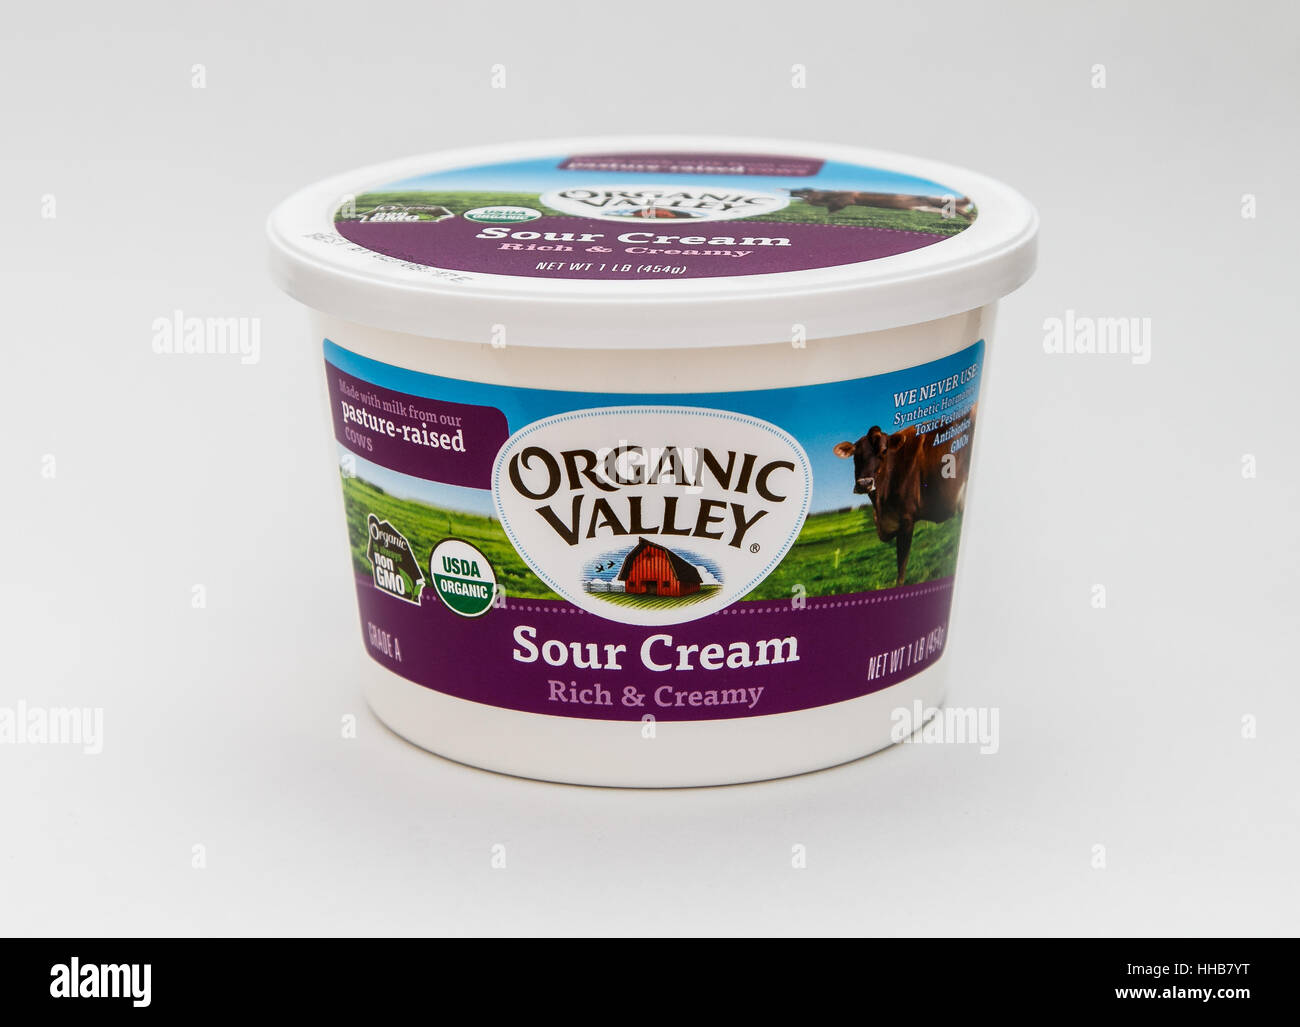 A single tub of sour cream by Organic Valley is seen against white background. Stock Photo